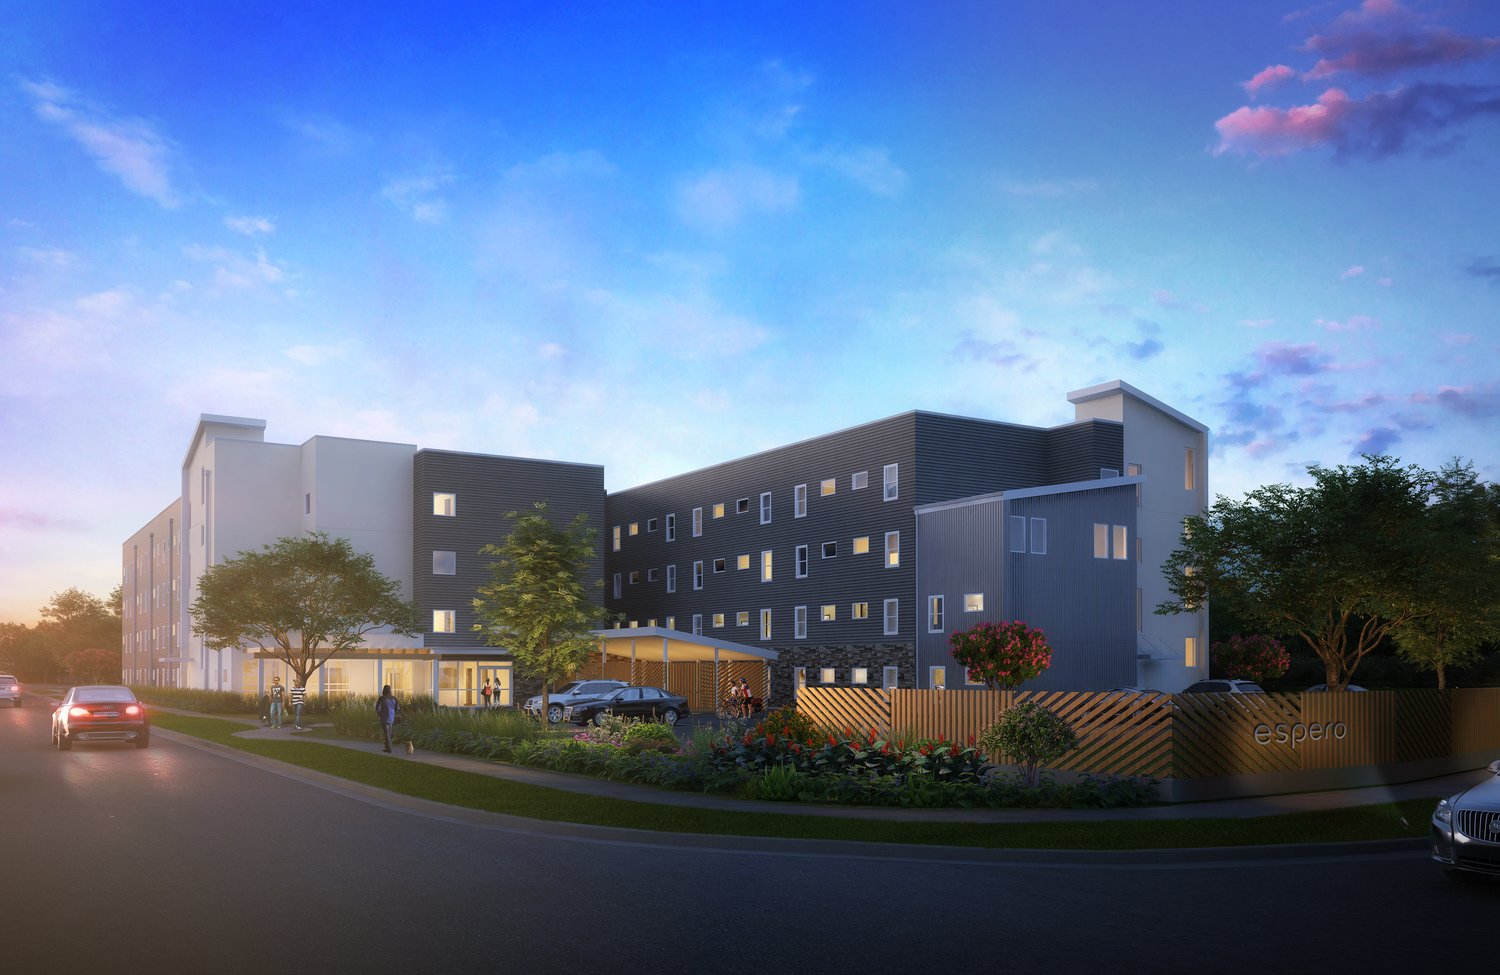 rendering of Espero Rutland, a new supportive housing development with on-site services